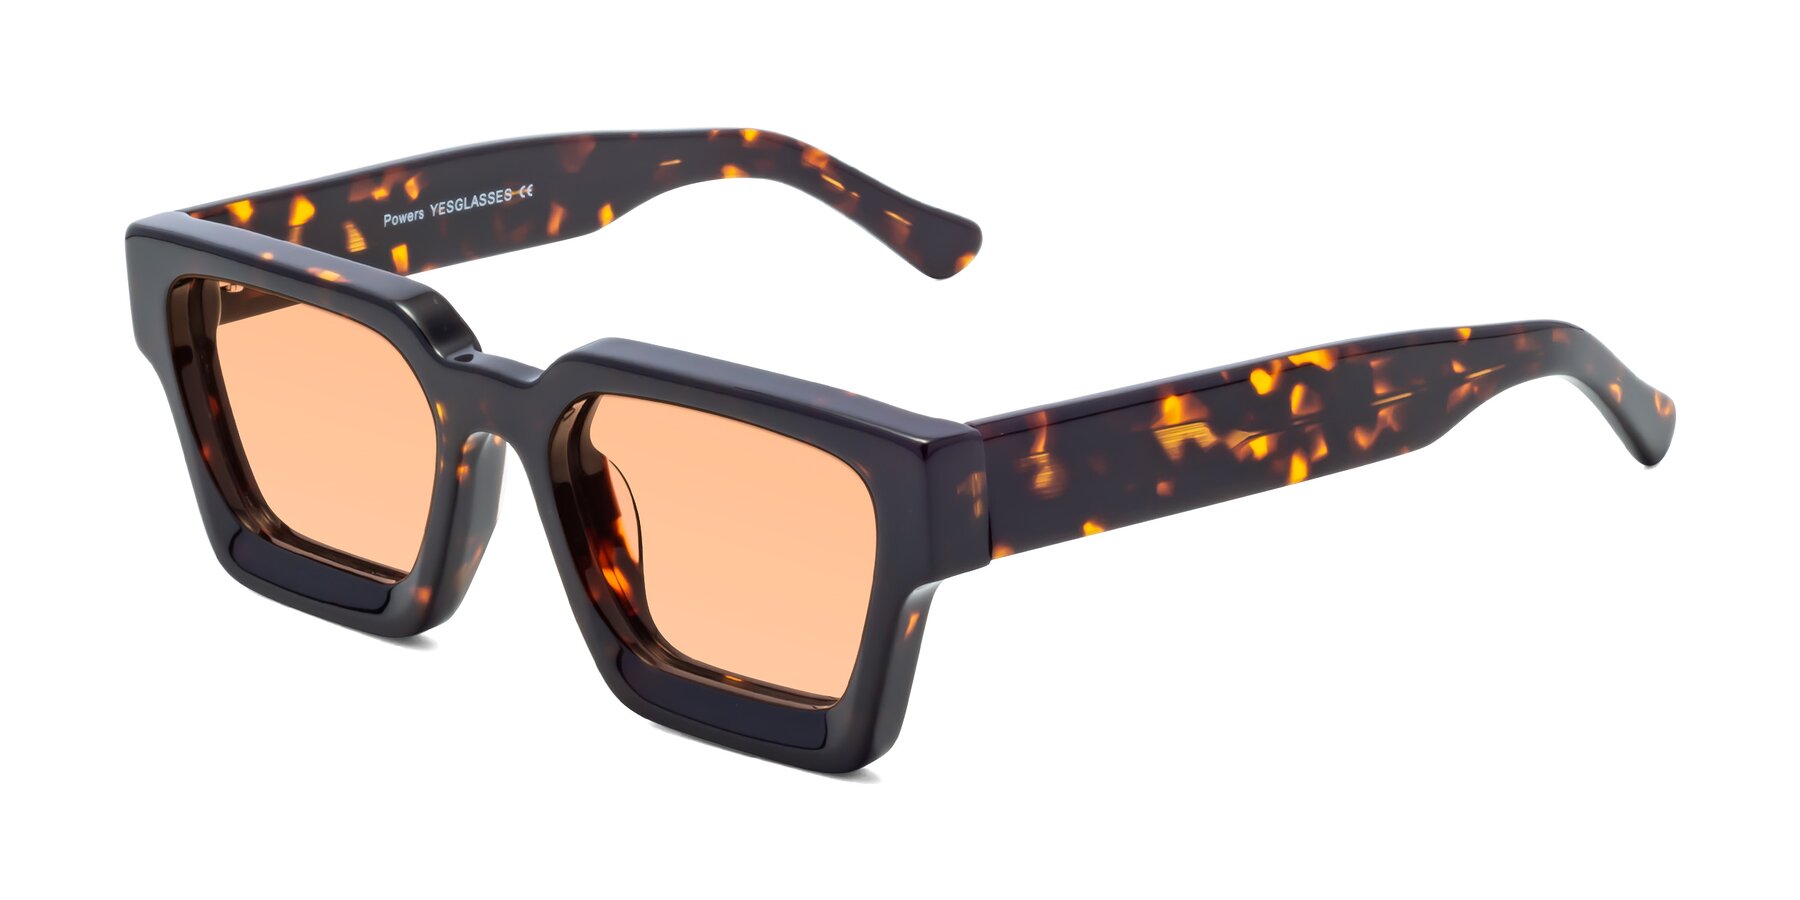 Angle of Powers in Tortoise with Light Orange Tinted Lenses